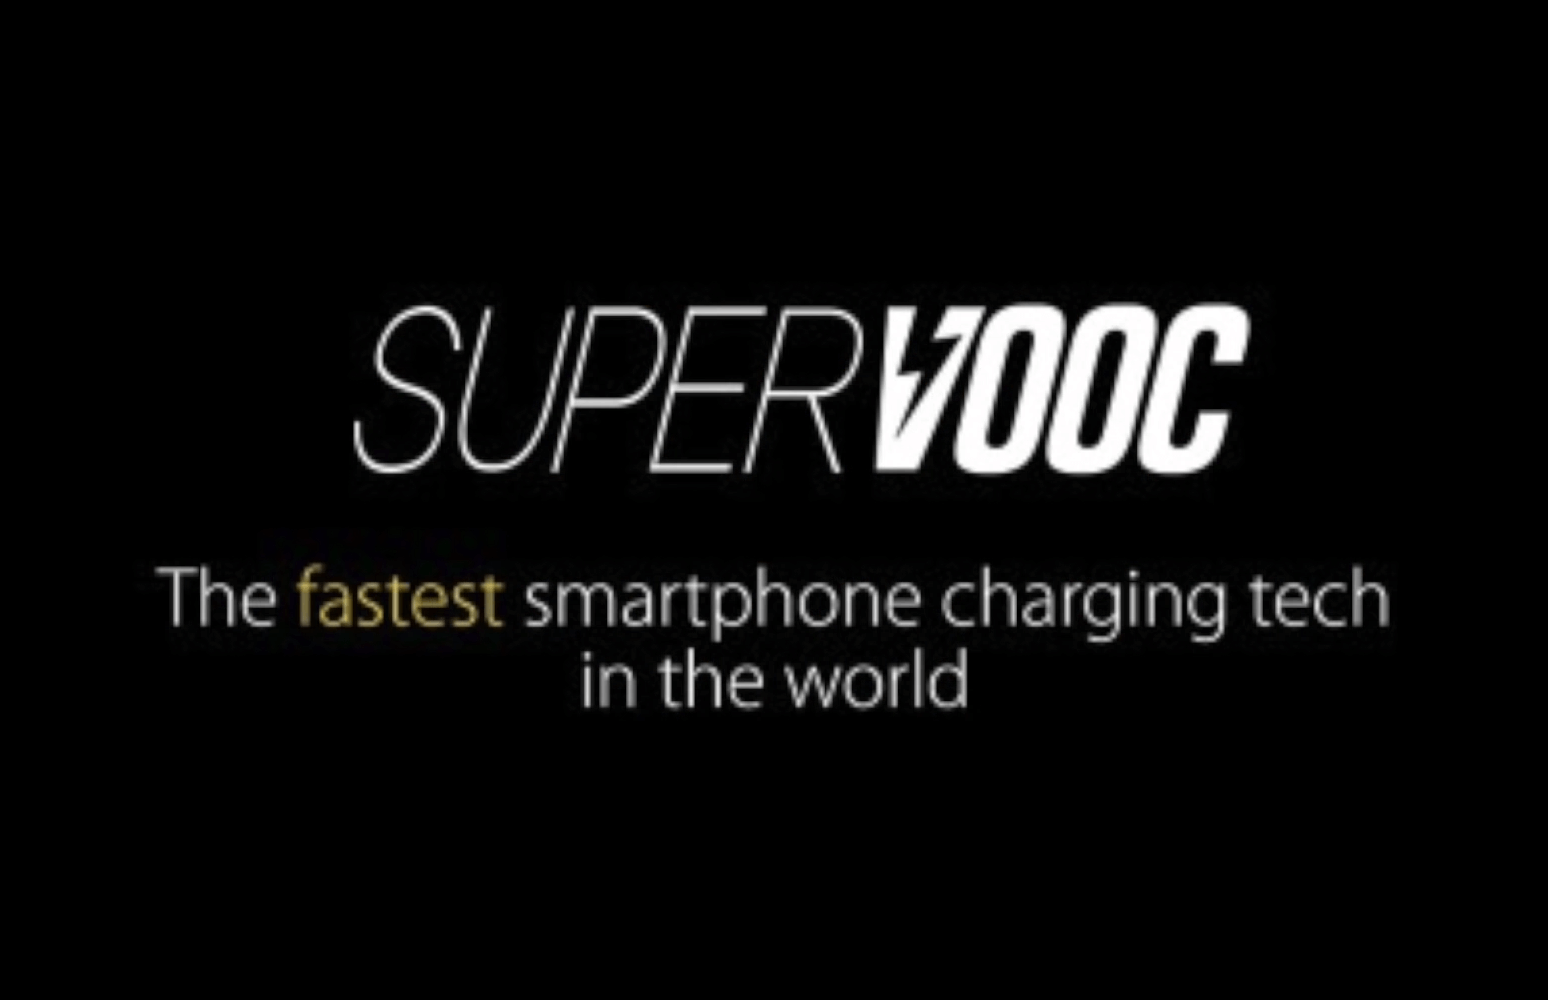 vooc charger patented by oppo